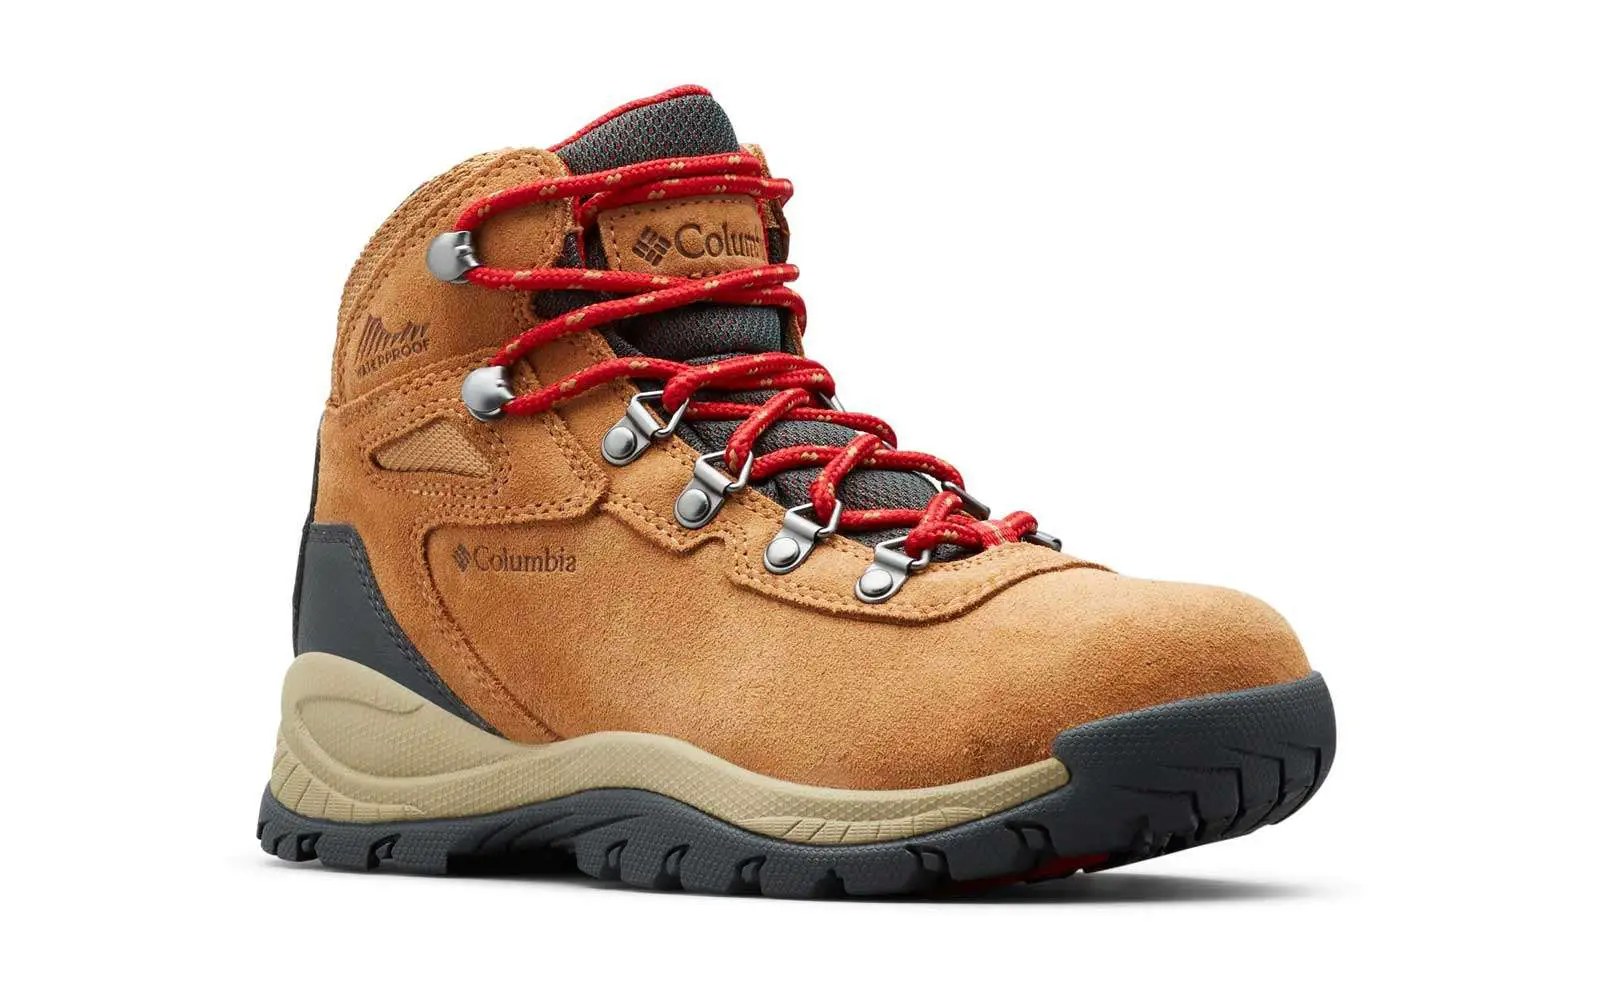 The 20 Best Hiking Shoes and Boots for Women in 2019 ...